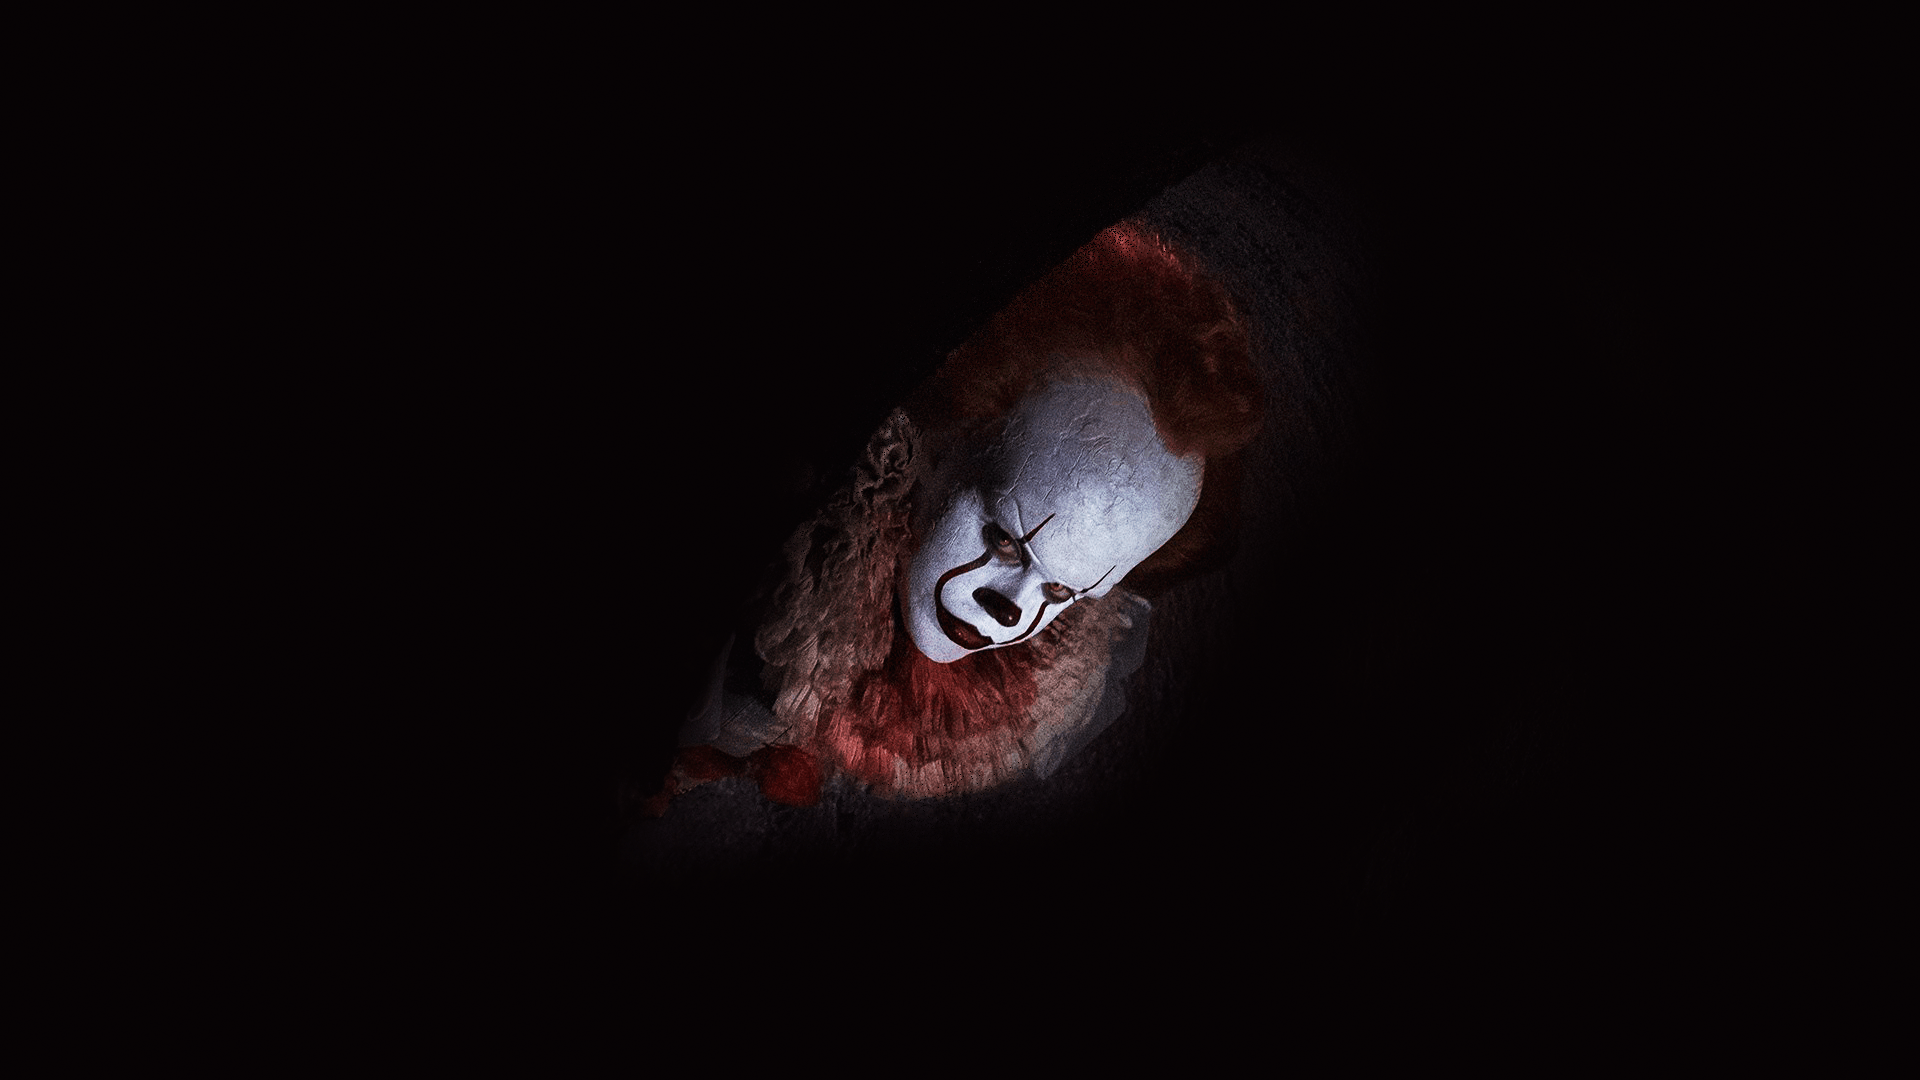 IT Chapter 2 Pennywise Clown Scary 4K Wallpaper 5801